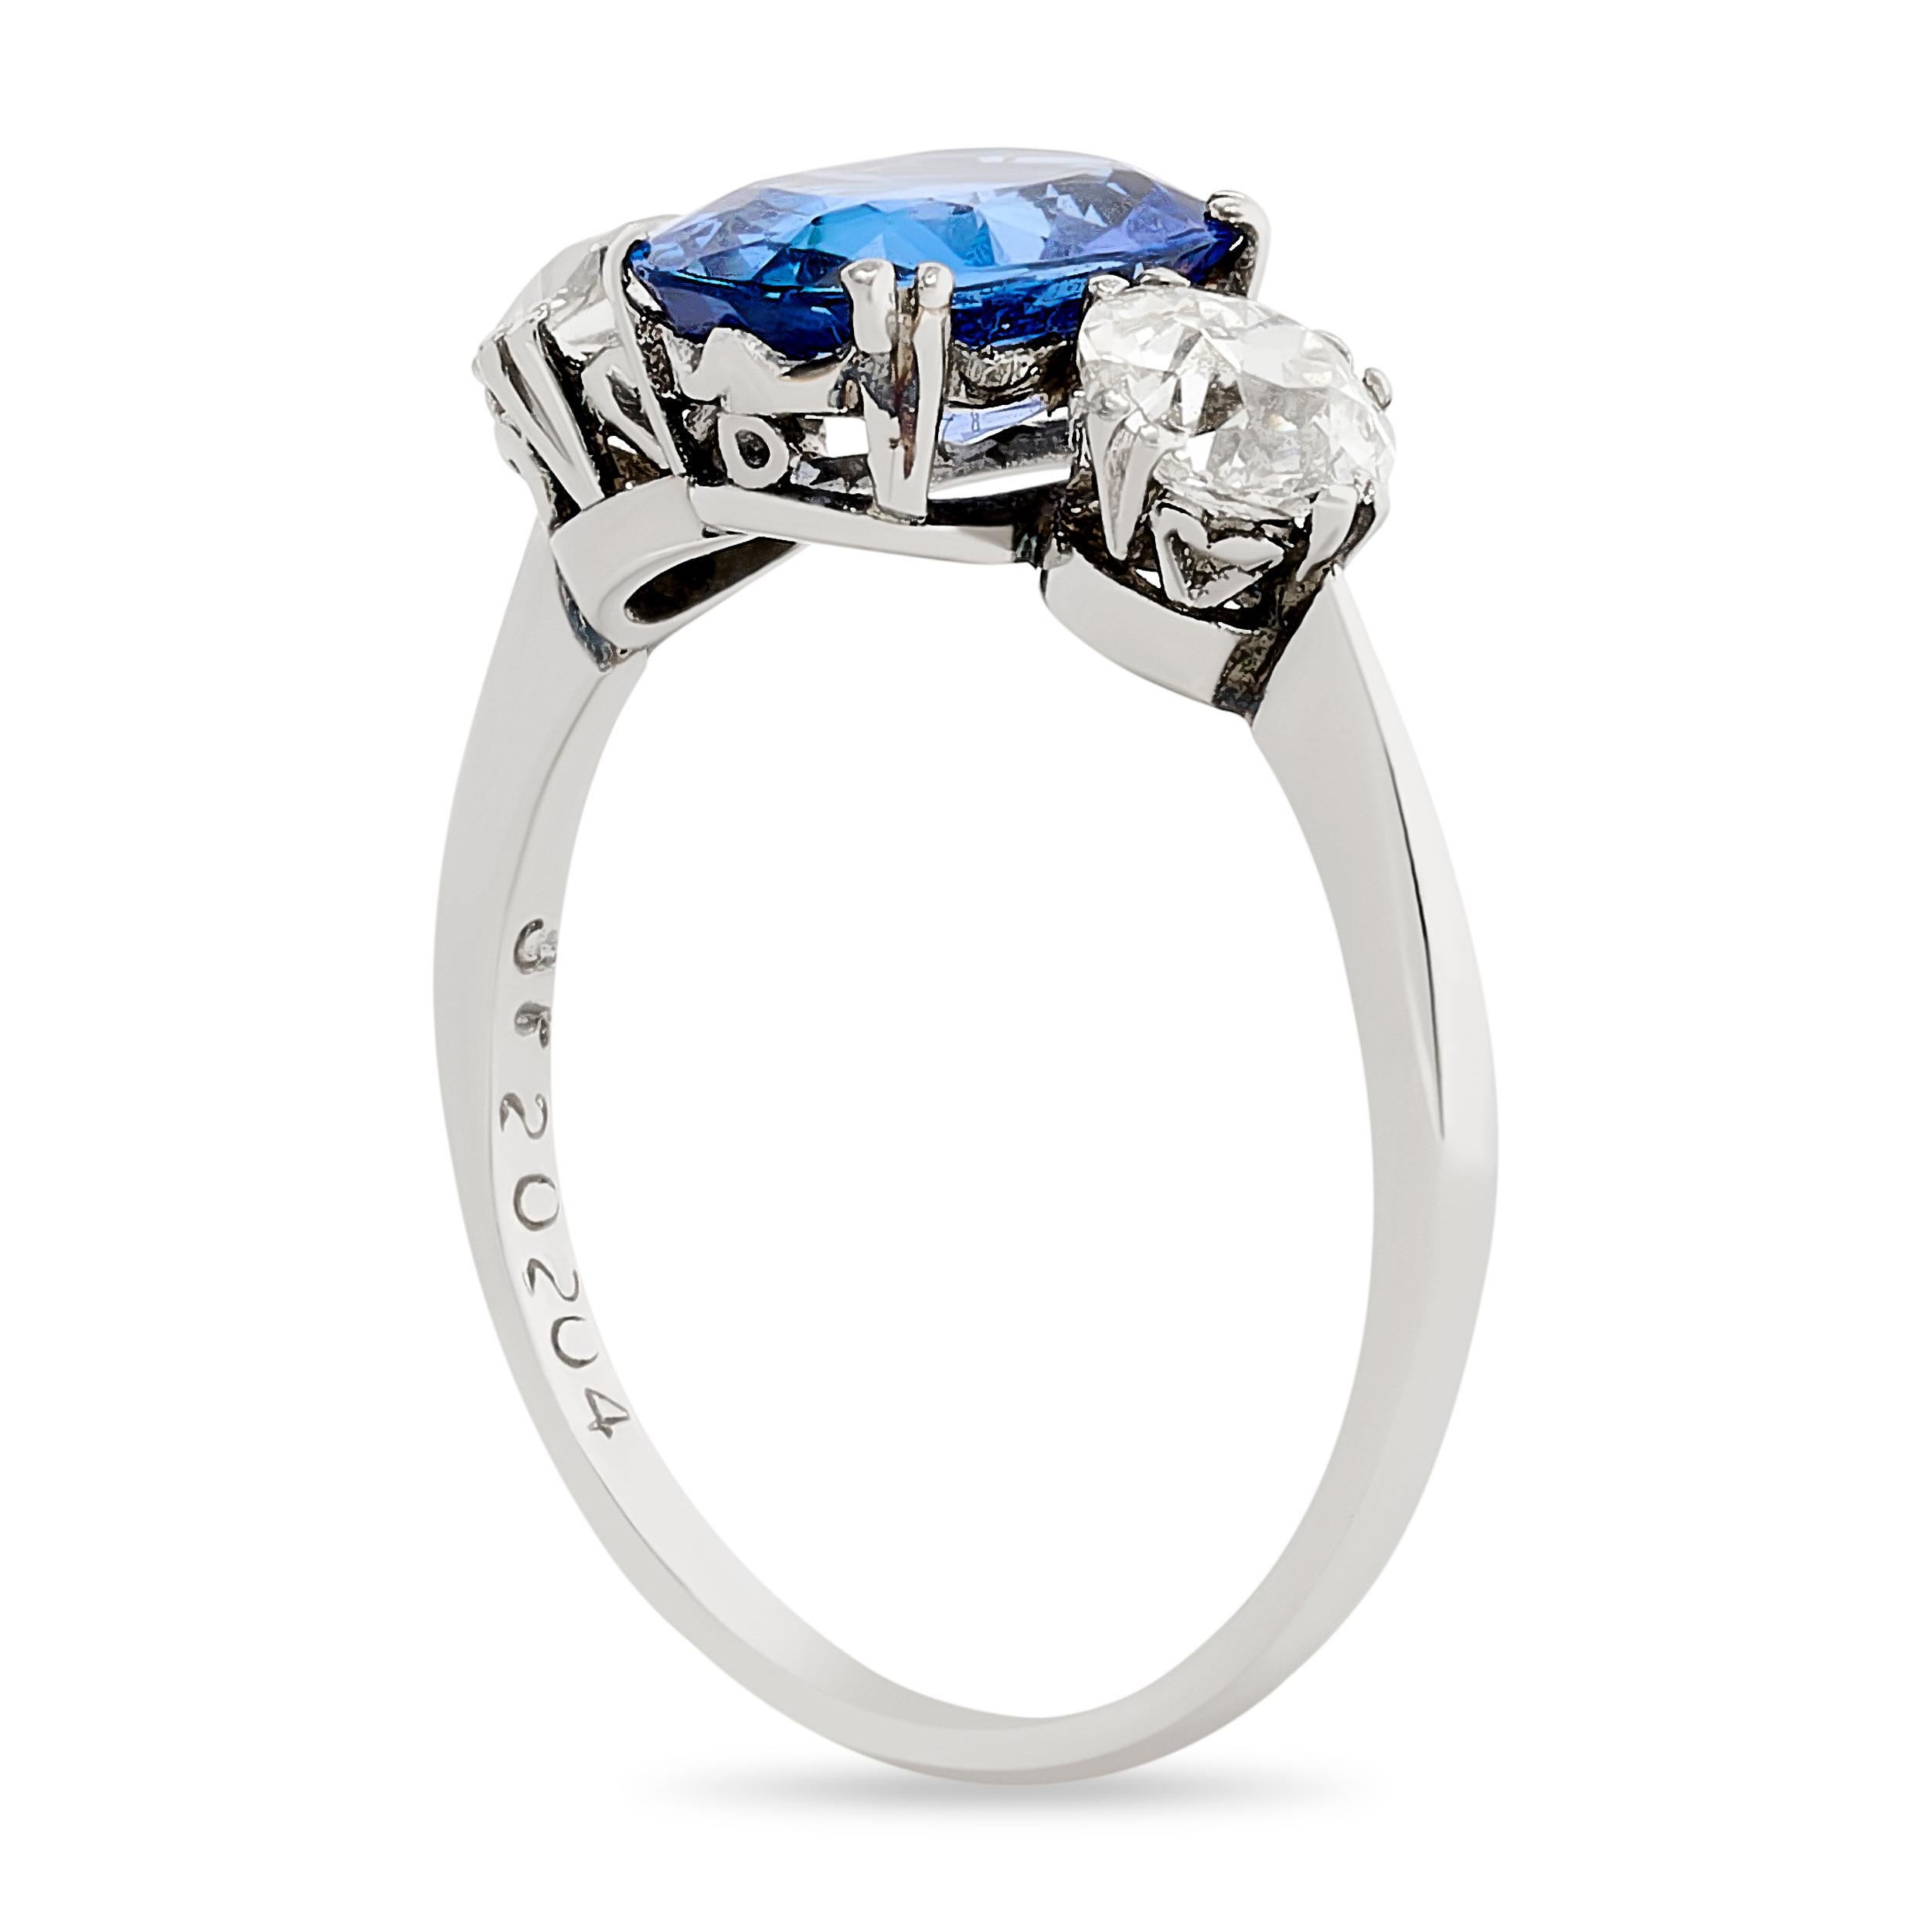 A J.E. Caldwell sapphire and old european cut diamond three-stone ring—a captivating union of a deep blue sapphire and sparkling old diamonds, weaving a story of enduring elegance and classic charm.

The center of this ring is a 2.17 carat unheated